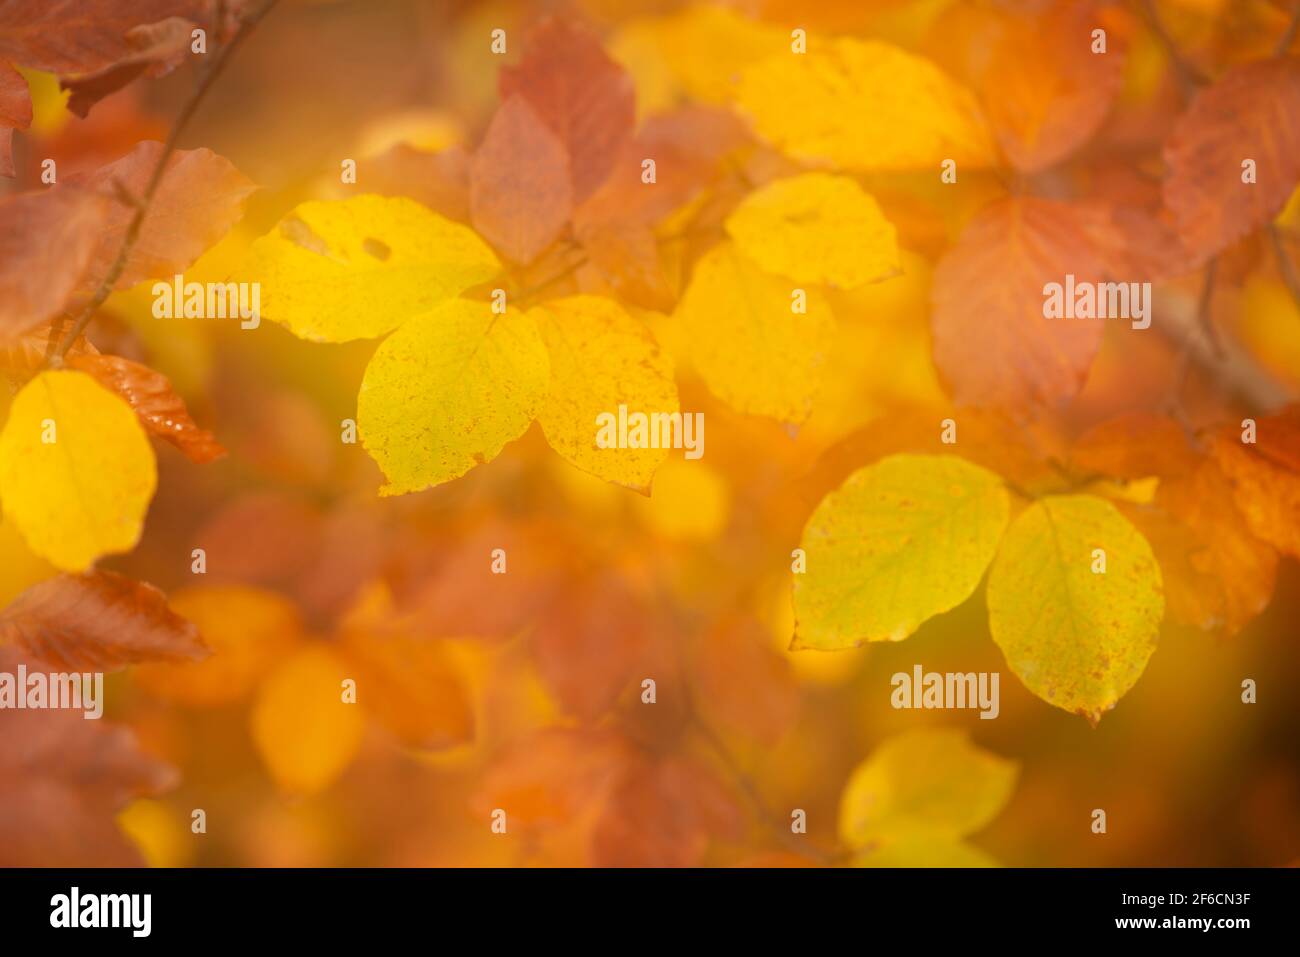 Autumn leafs in a idyllic soft focus image Stock Photo